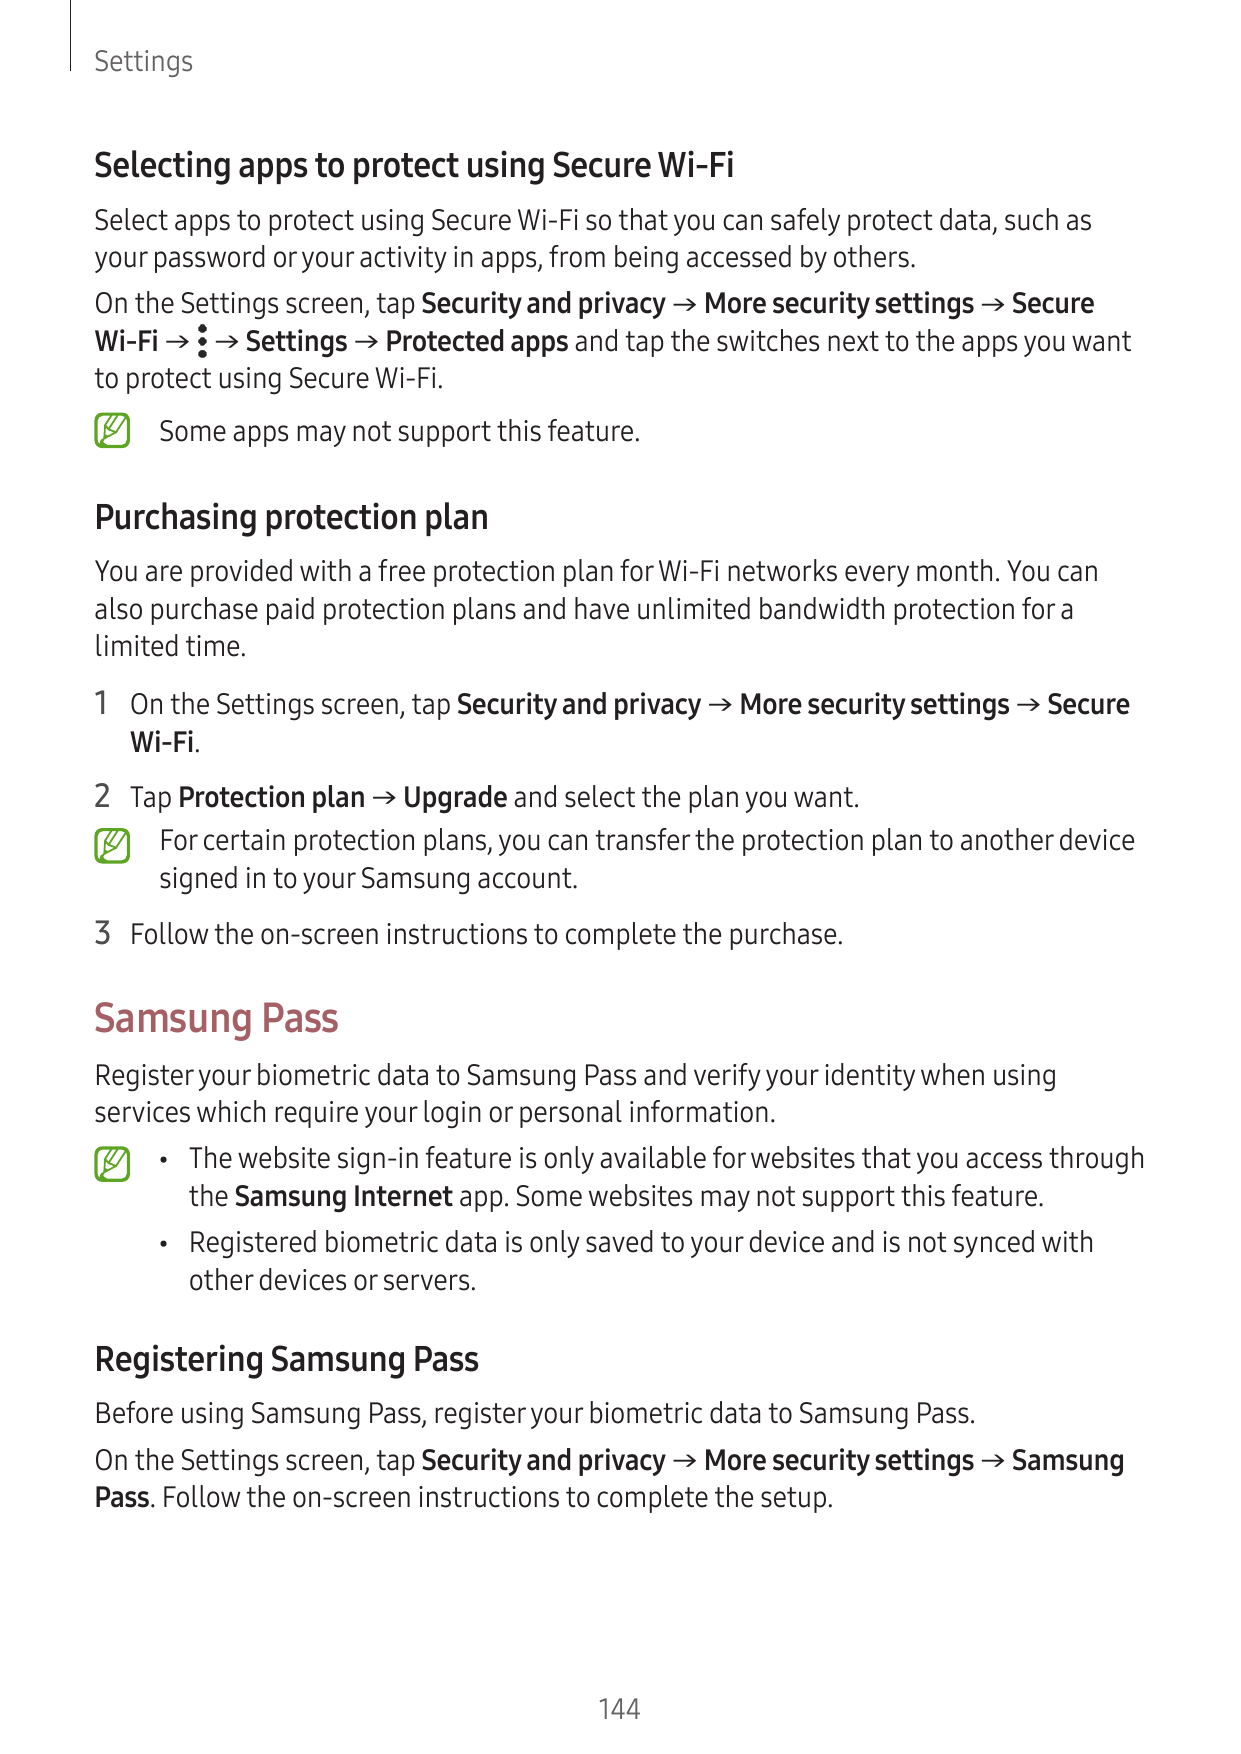 SettingsSelecting apps to protect using Secure Wi-FiSelect apps to protect using Secure Wi-Fi so that you can safely protect dat